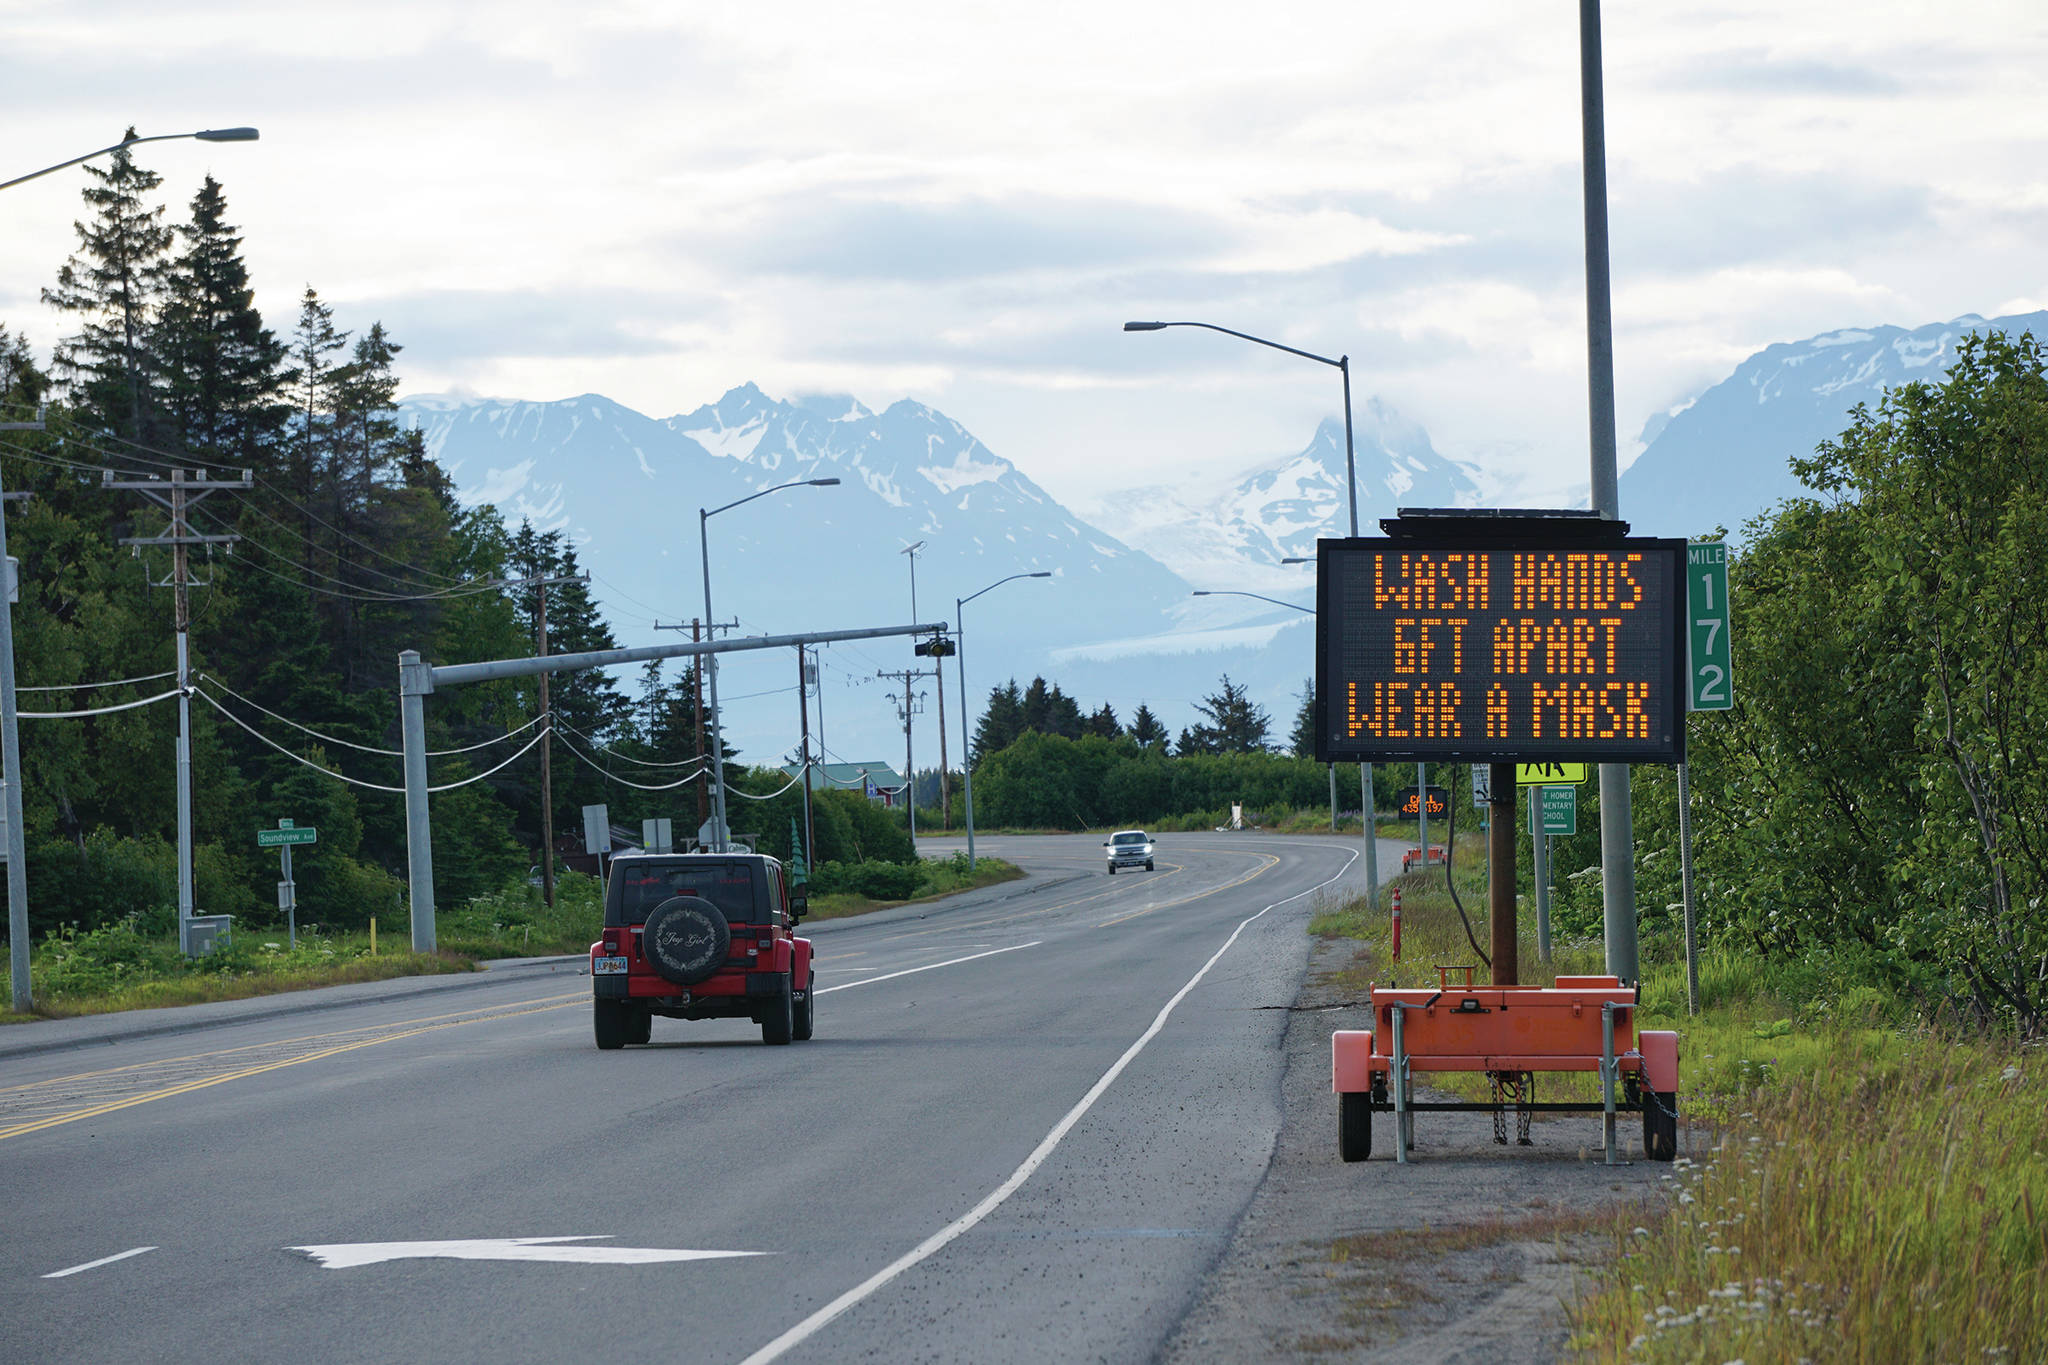 Cars pass the City of Homer advisory signs on Wednesday morning, June 24, 2020, at Mile 172 Sterling Highway near West Hill Road in Homer, Alaska. The sign also reads “Keep COVID-19 out of Homer.” (Photo by Michael Armstrong/Homer News)